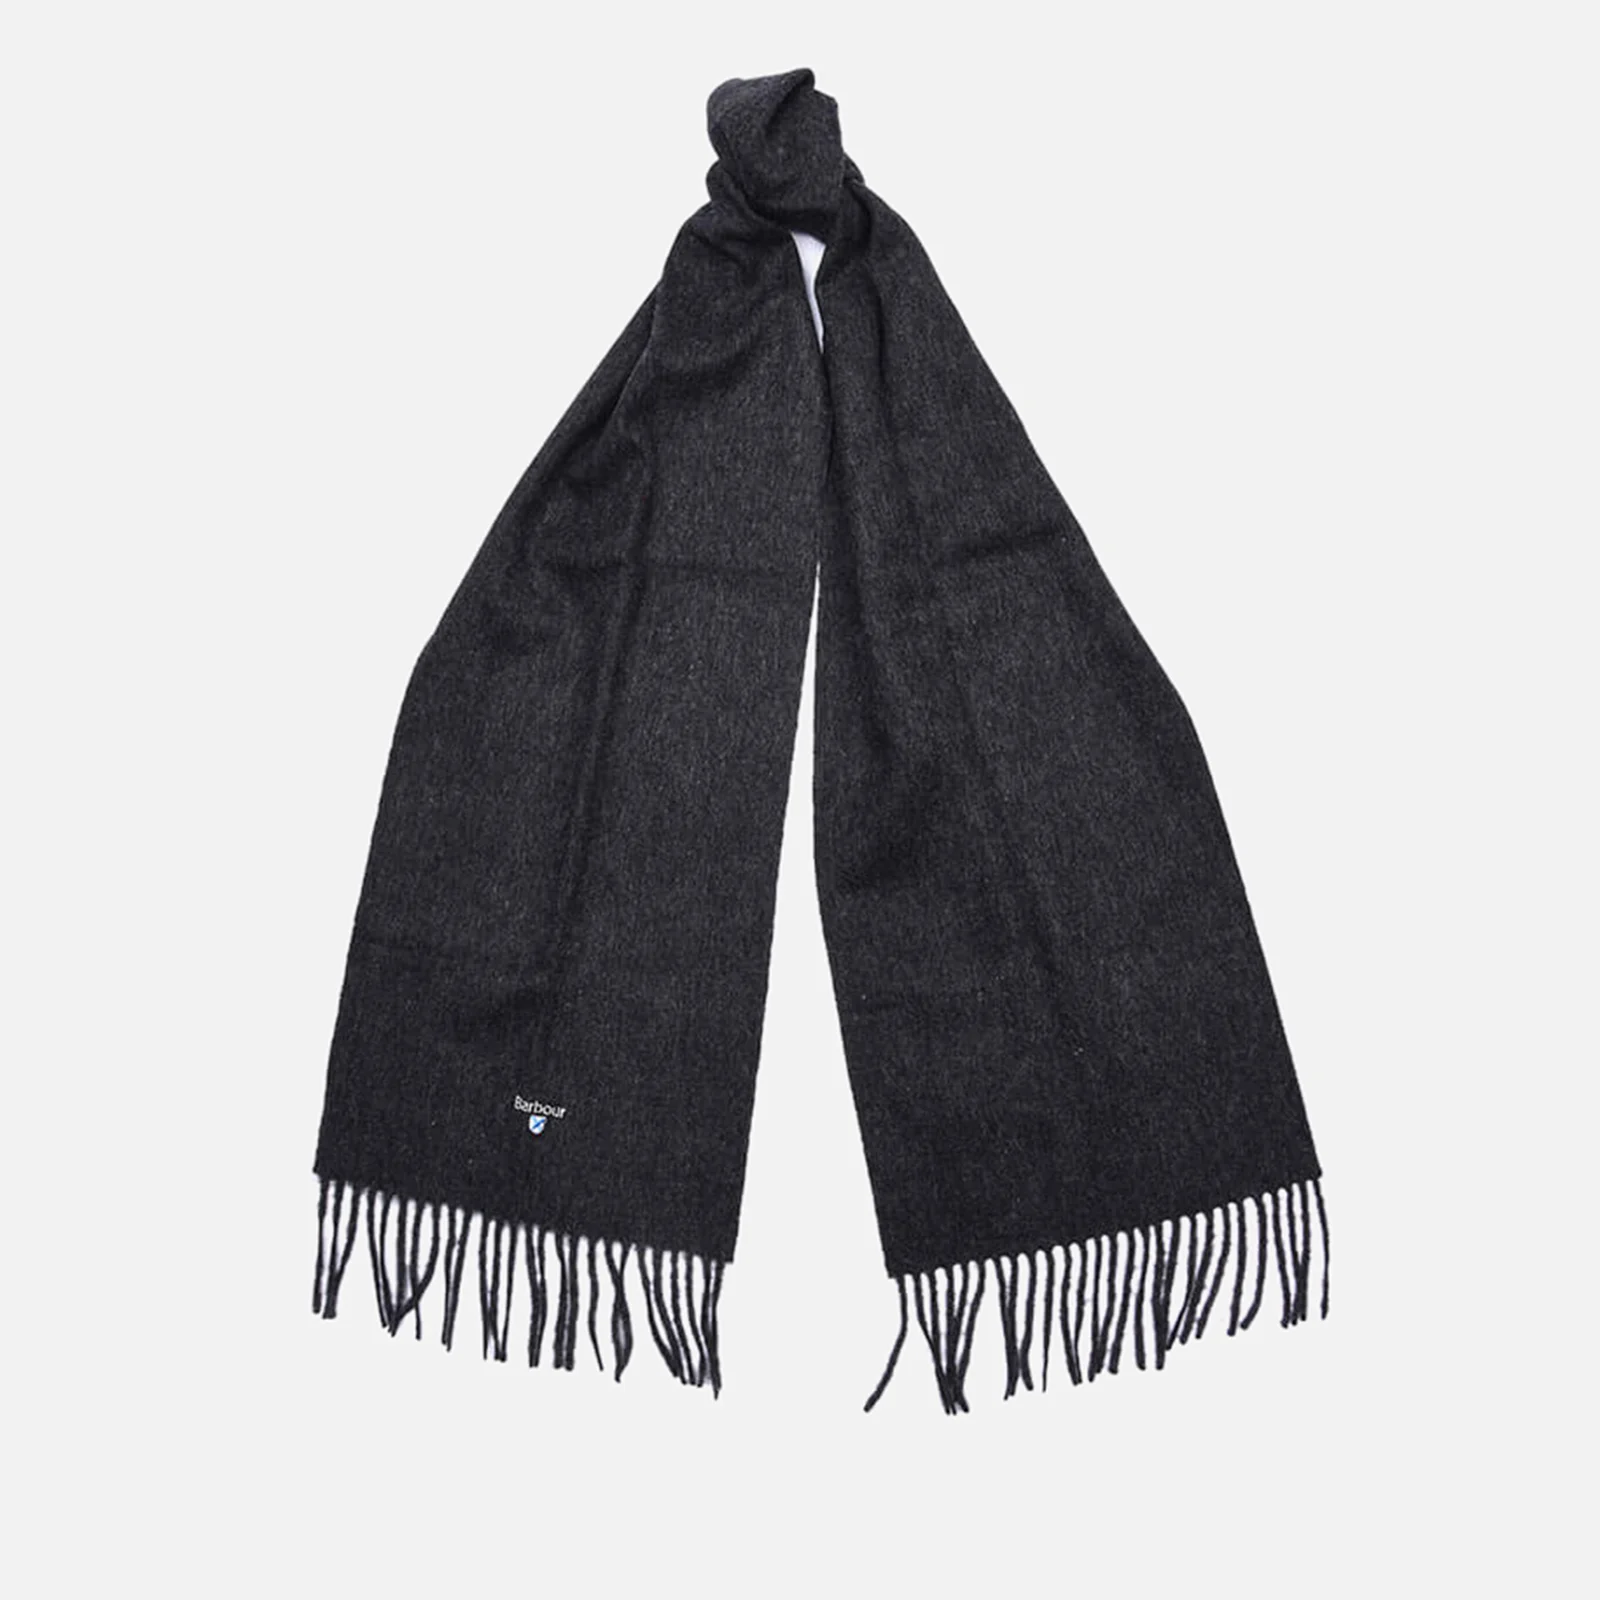 Barbour Men's Plain Lambswool Scarf - Charcoal Image 1